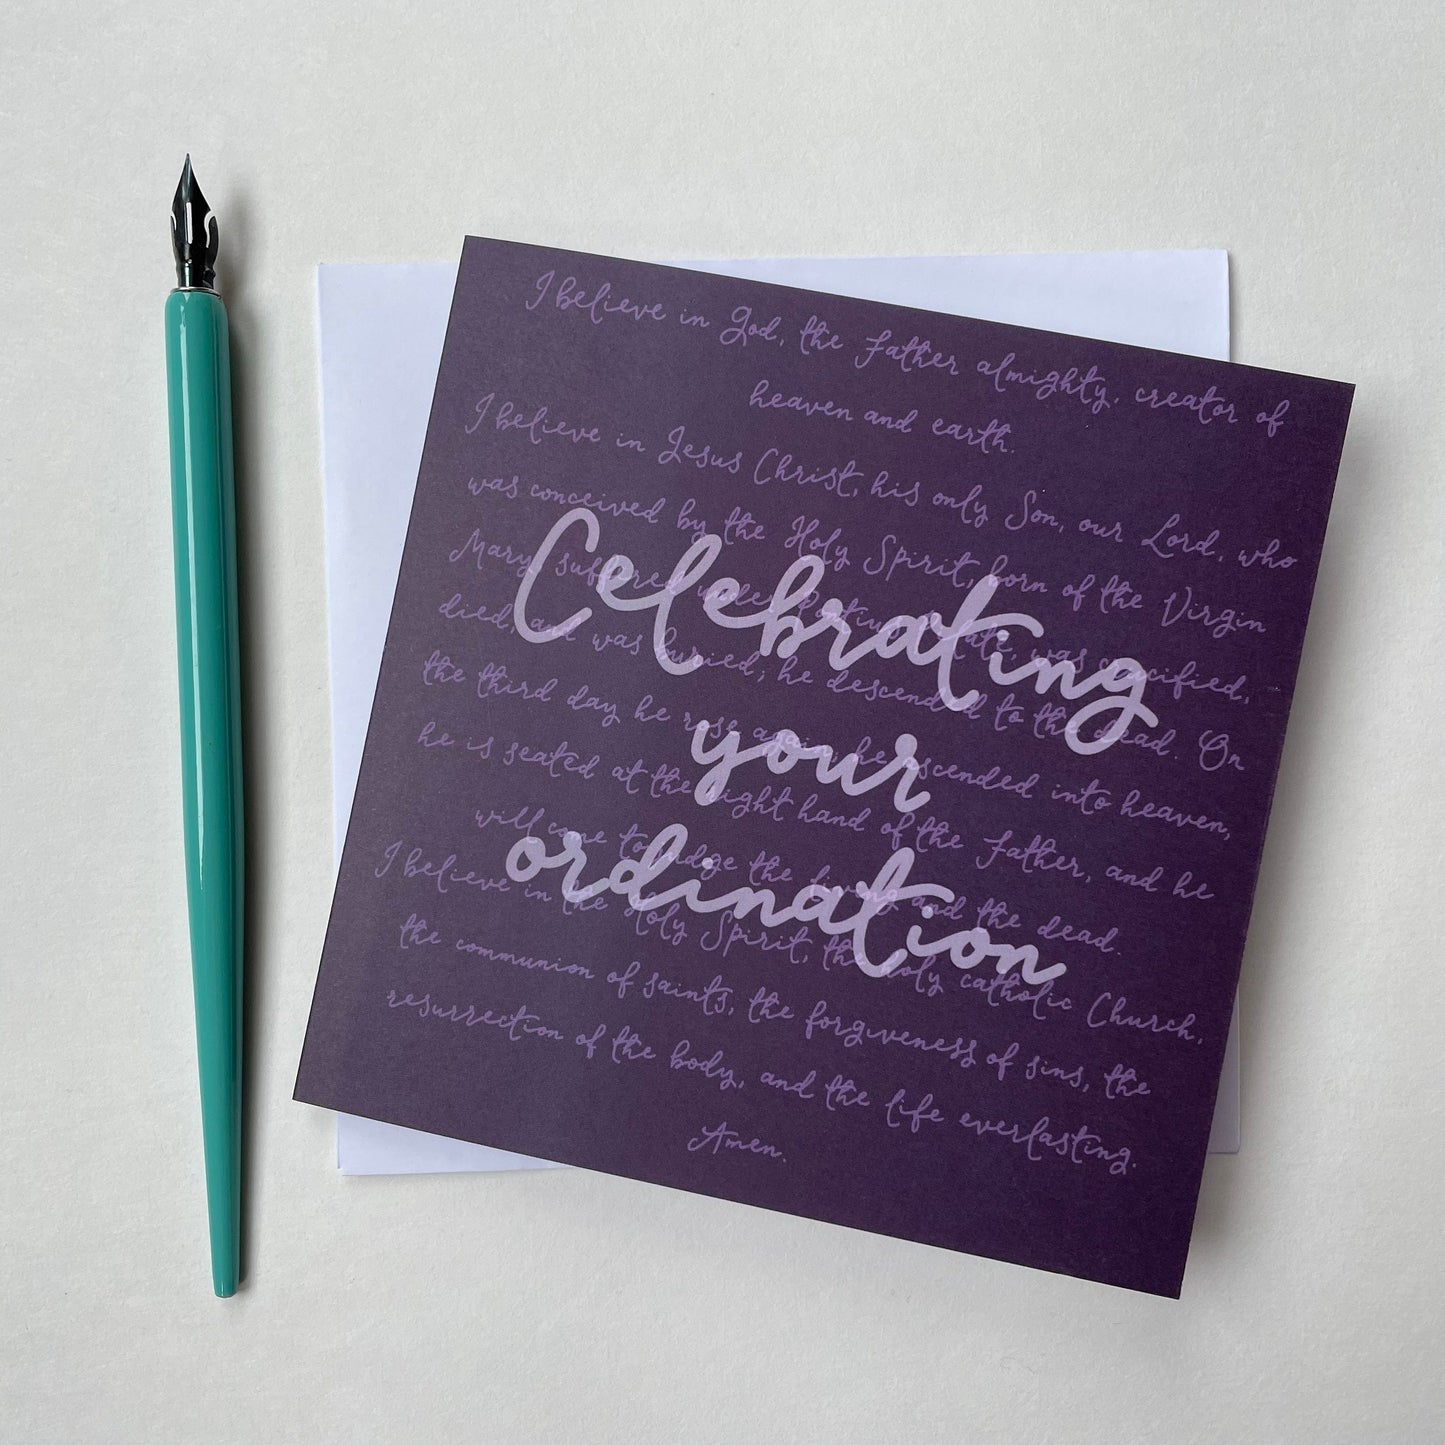 And Hope Designs Greeting & Note Cards Ordination card - celebrating your ordination - apostles creed